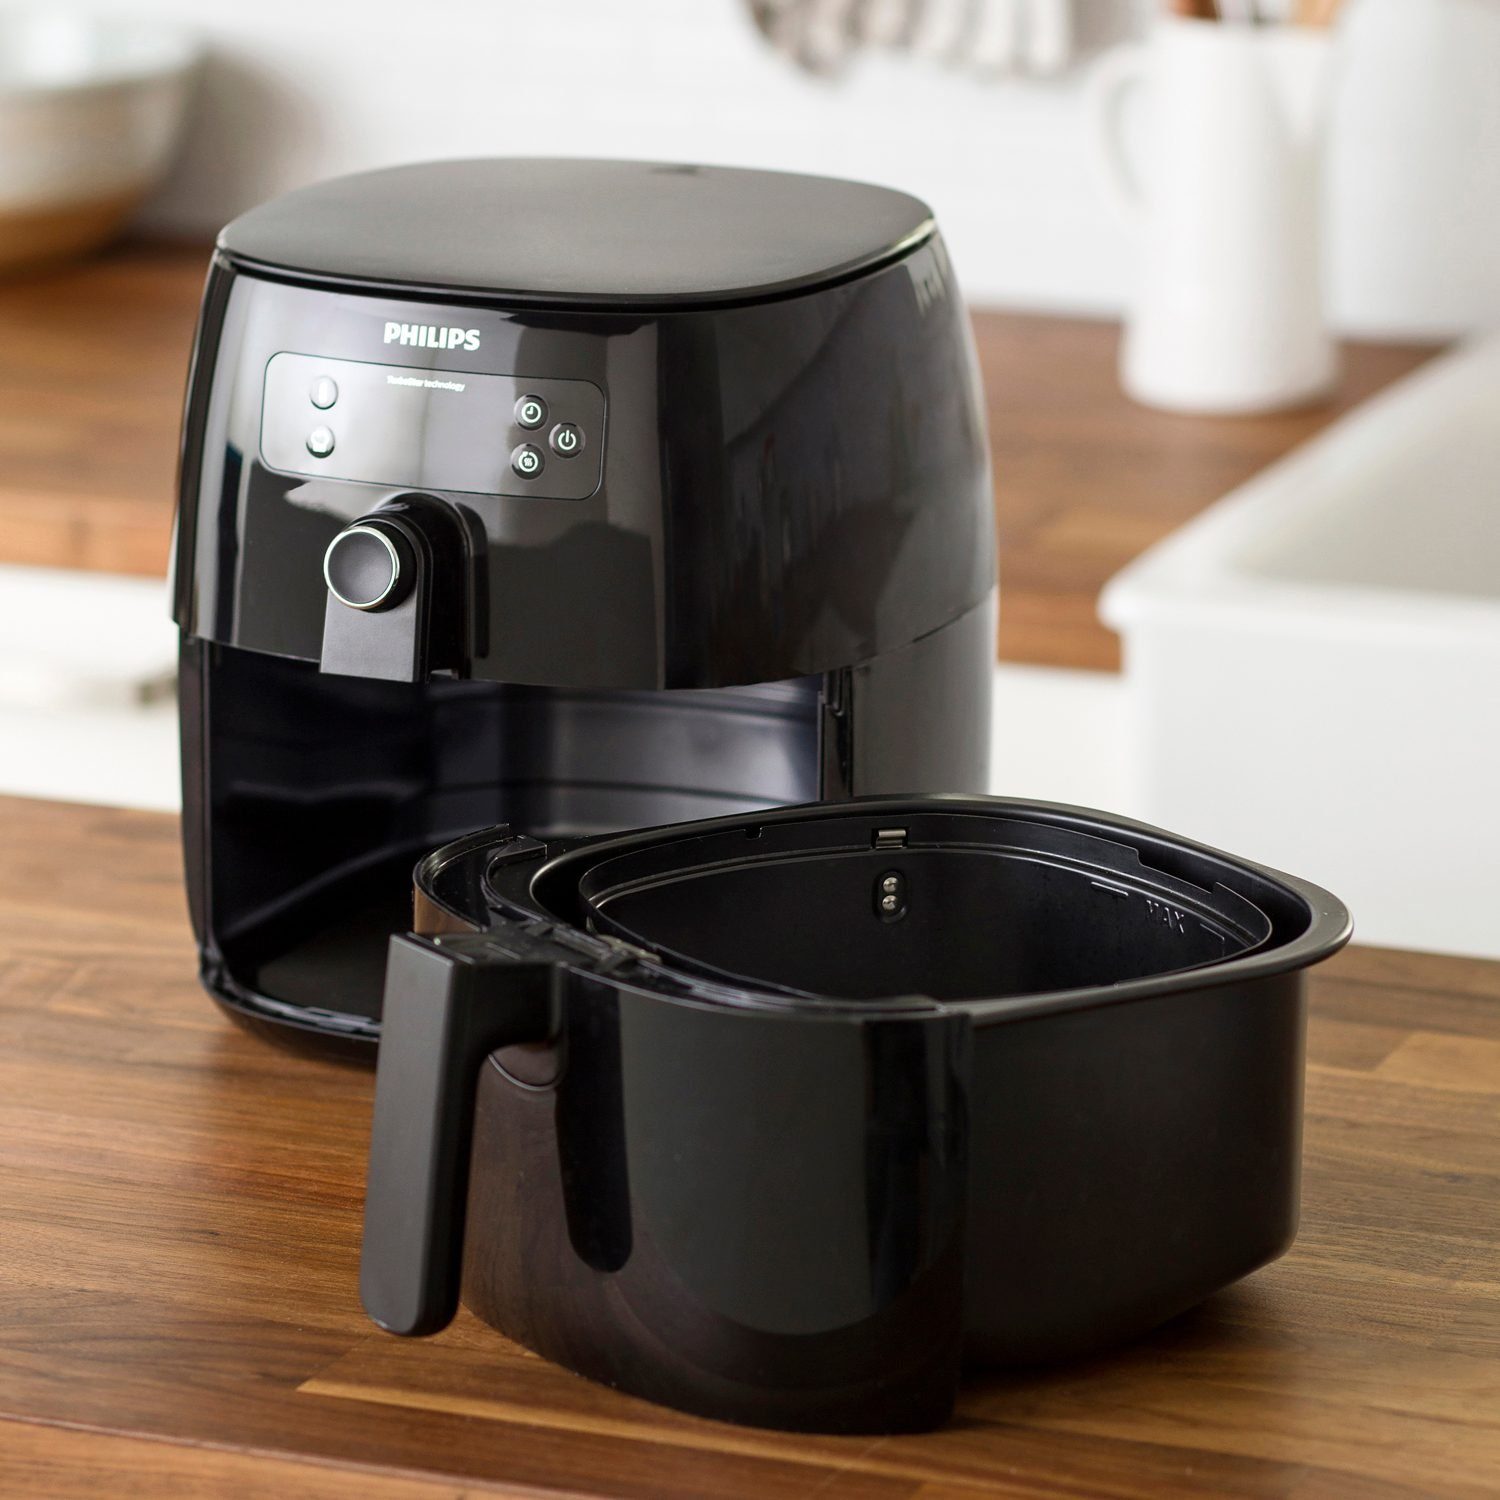 https://www.familyhandyman.com/wp-content/uploads/2023/01/how-to-clean-an-air-fryer01_WCICINRB19_PU4352_C06_26_2bC.jpg